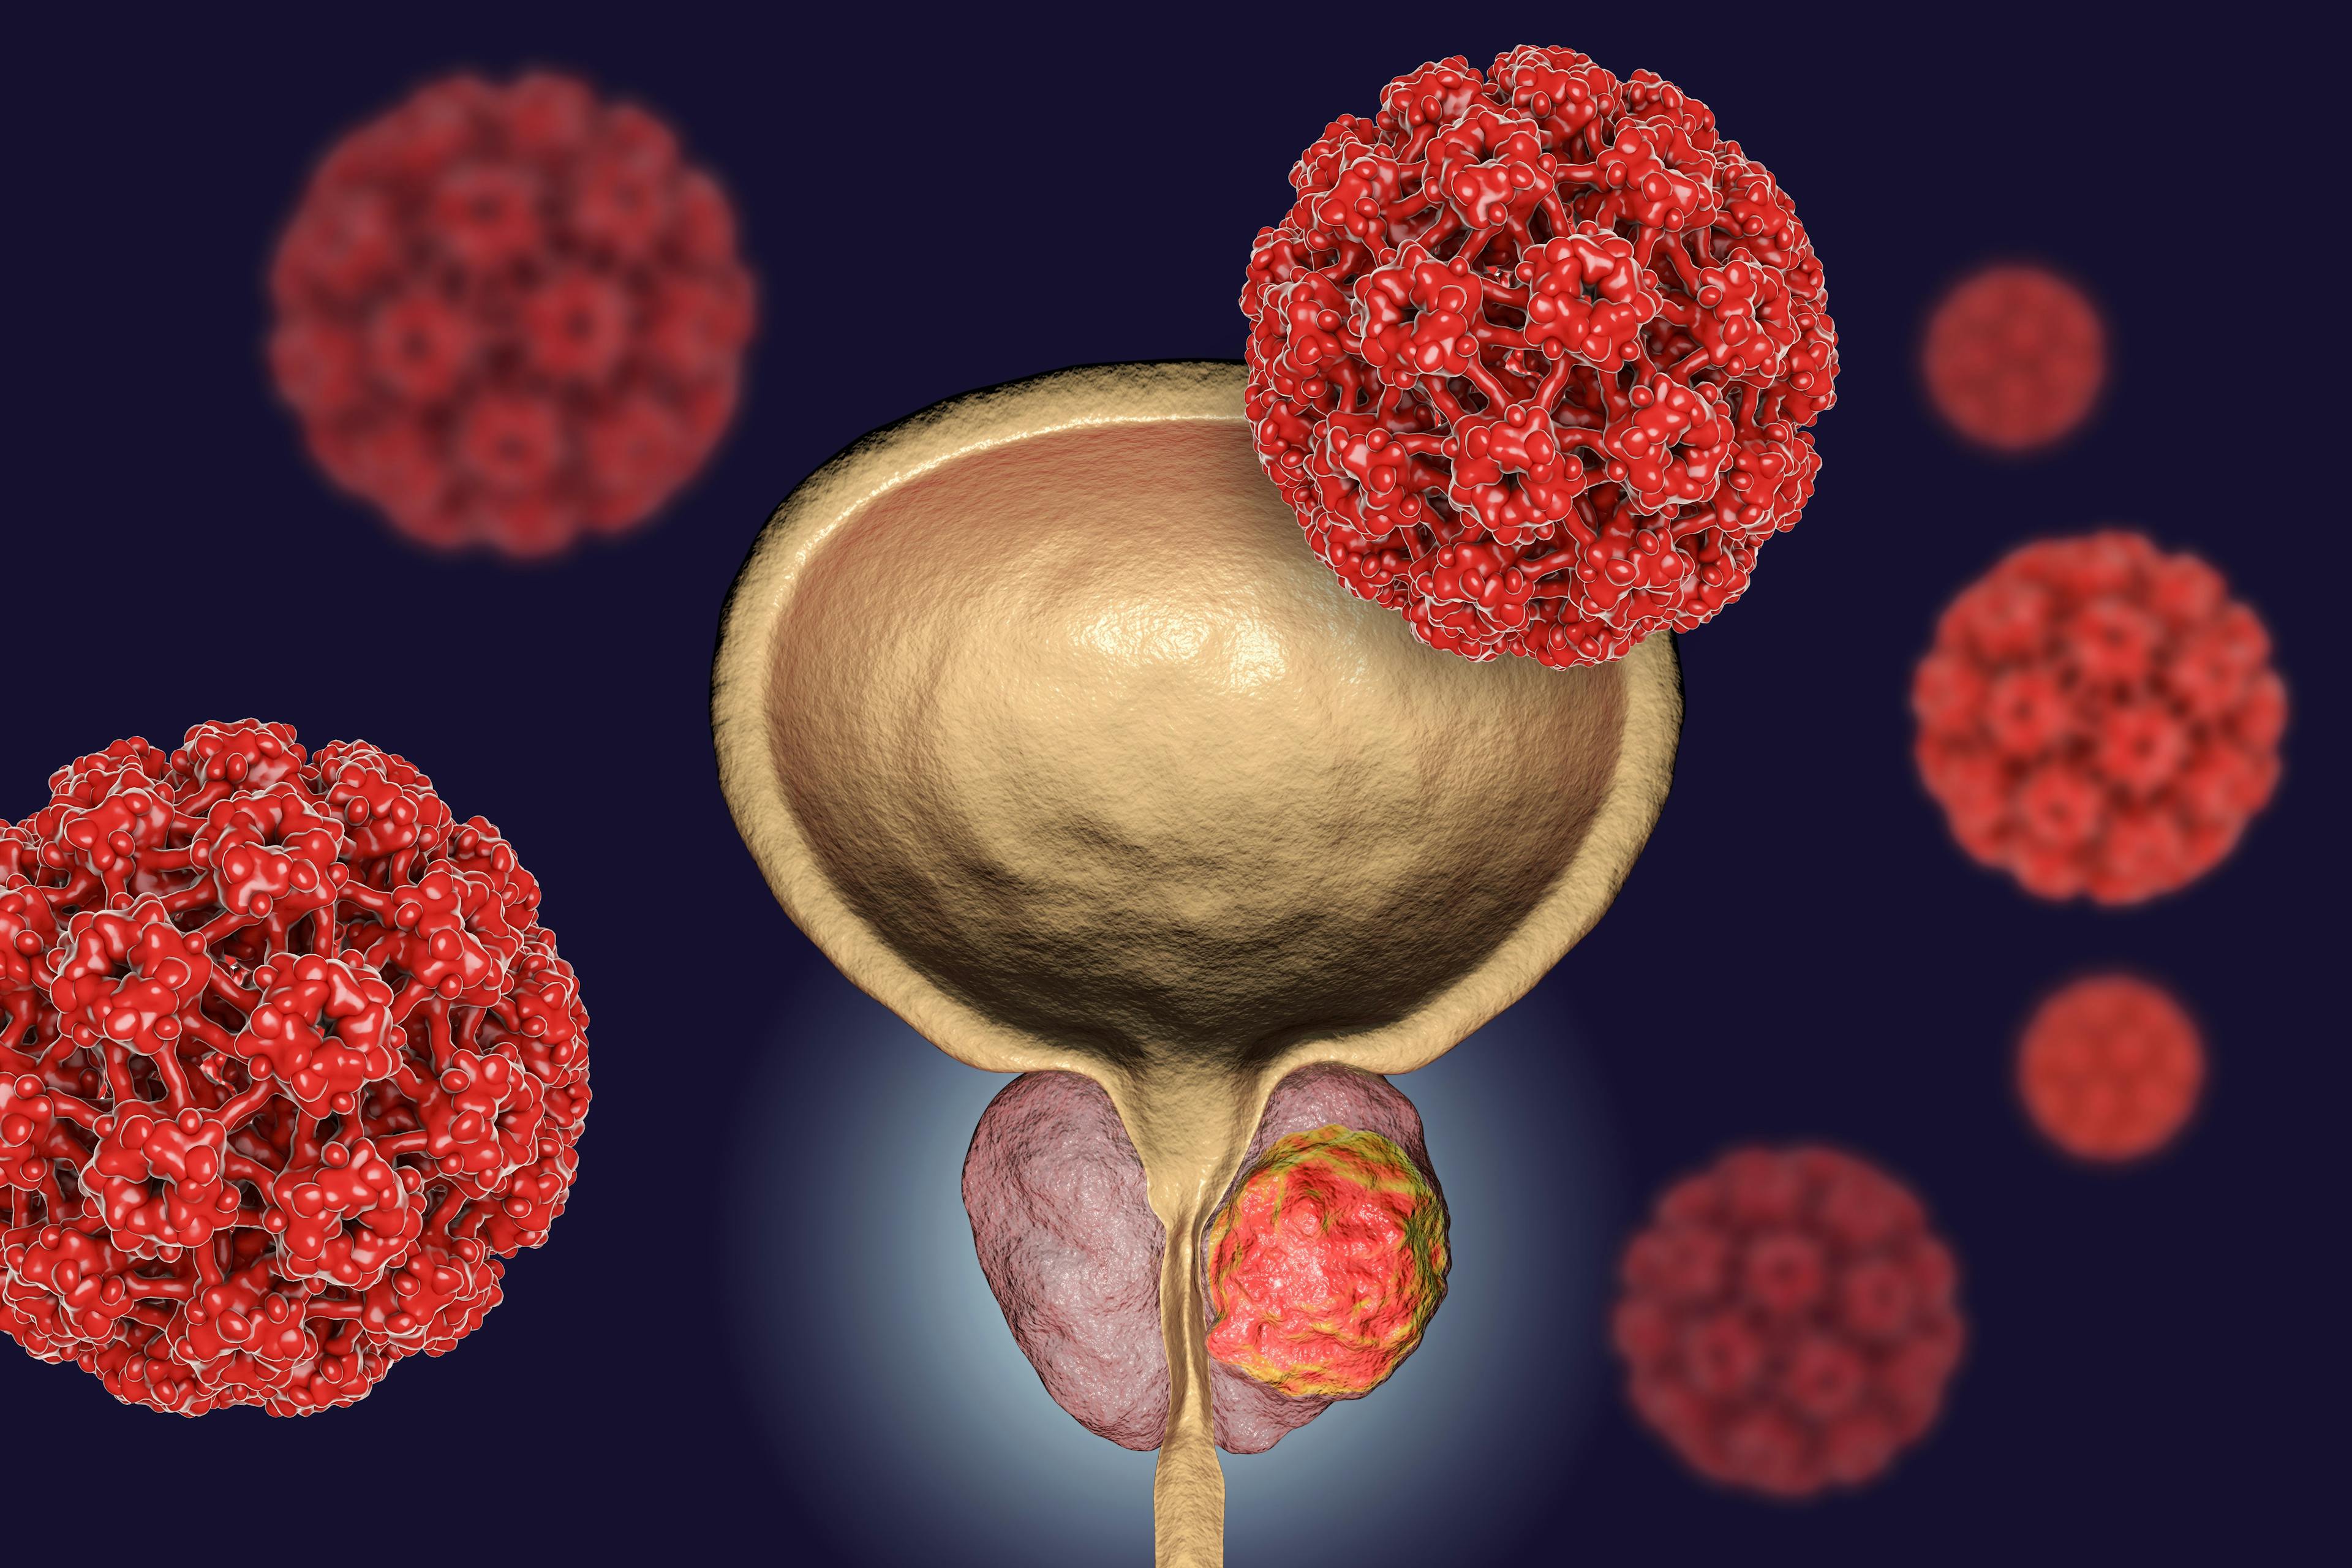 Preliminary findings indicate that P-PSMA-101, a CAR T-cell therapy, may be efficacious in patient with metastatic castration-resistant prostate cancer.